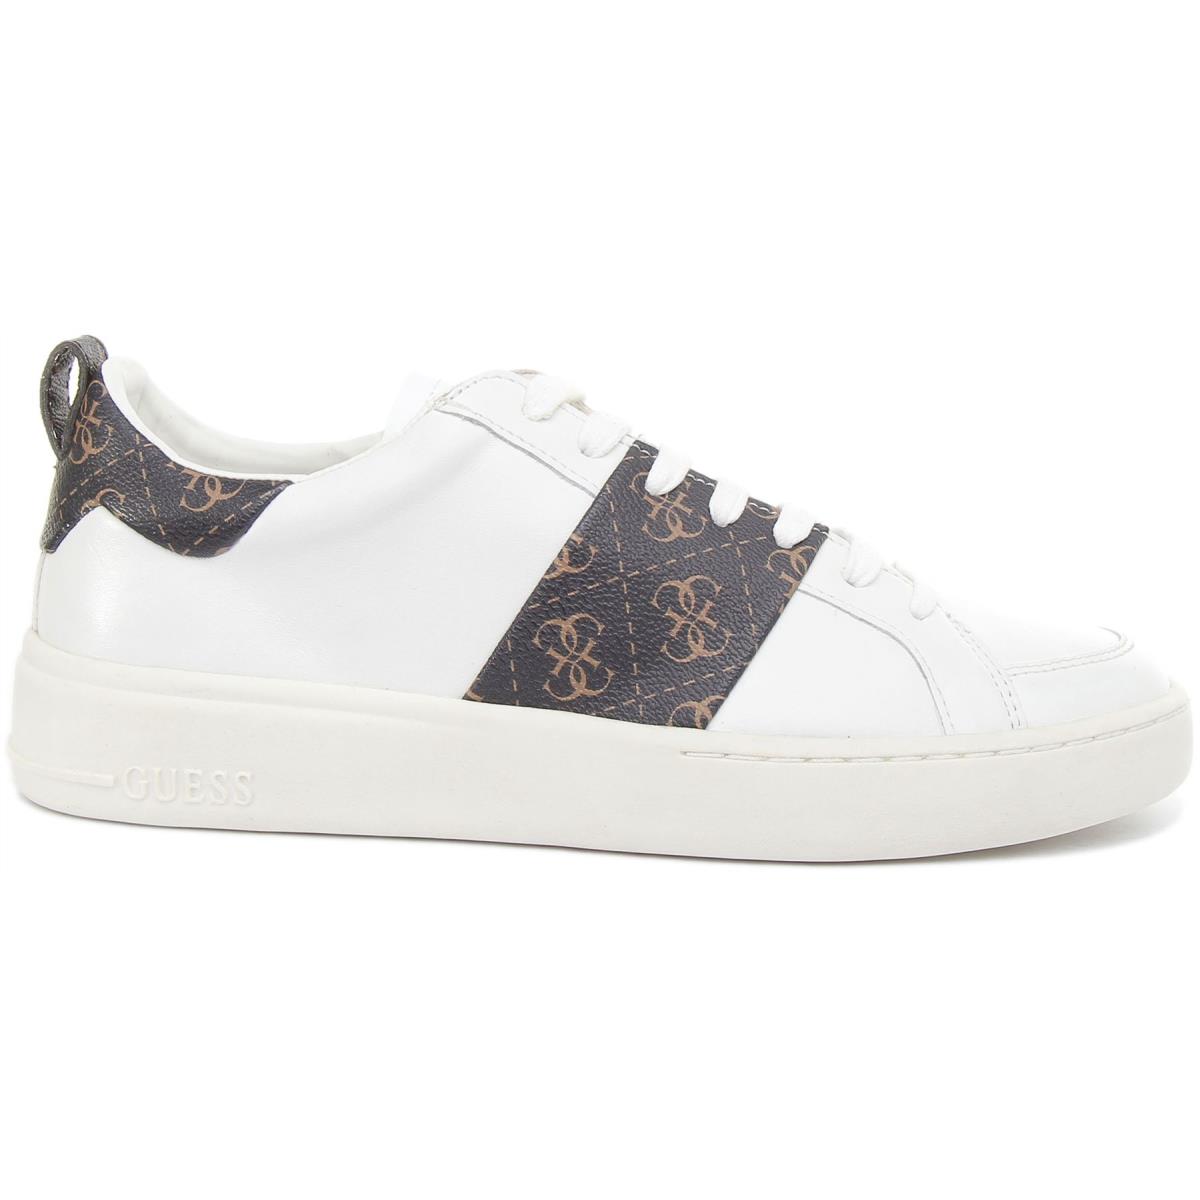 Guess Men Verona Leather Low Sneakers In White Brown Colour US 7 - 13